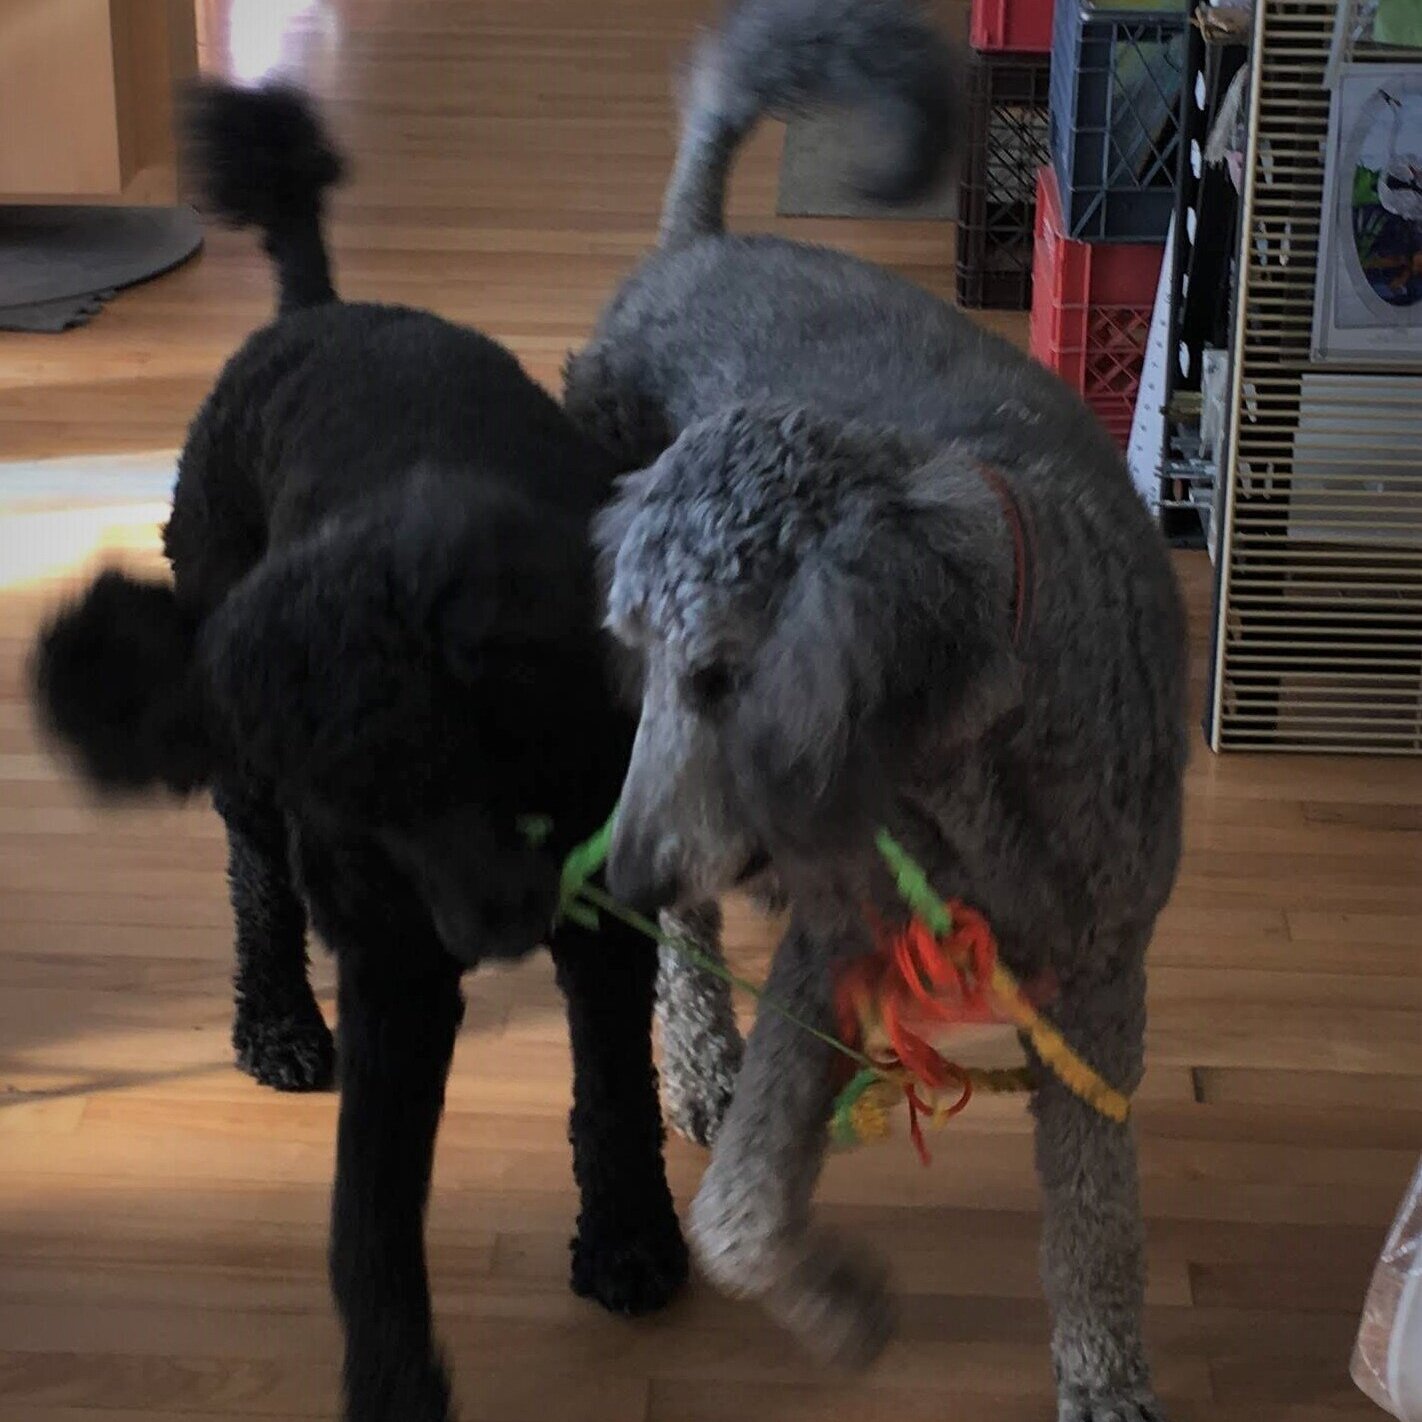 Matilda+and+Darrin+playing+like+pups+and+tearing+up+toys.jpg